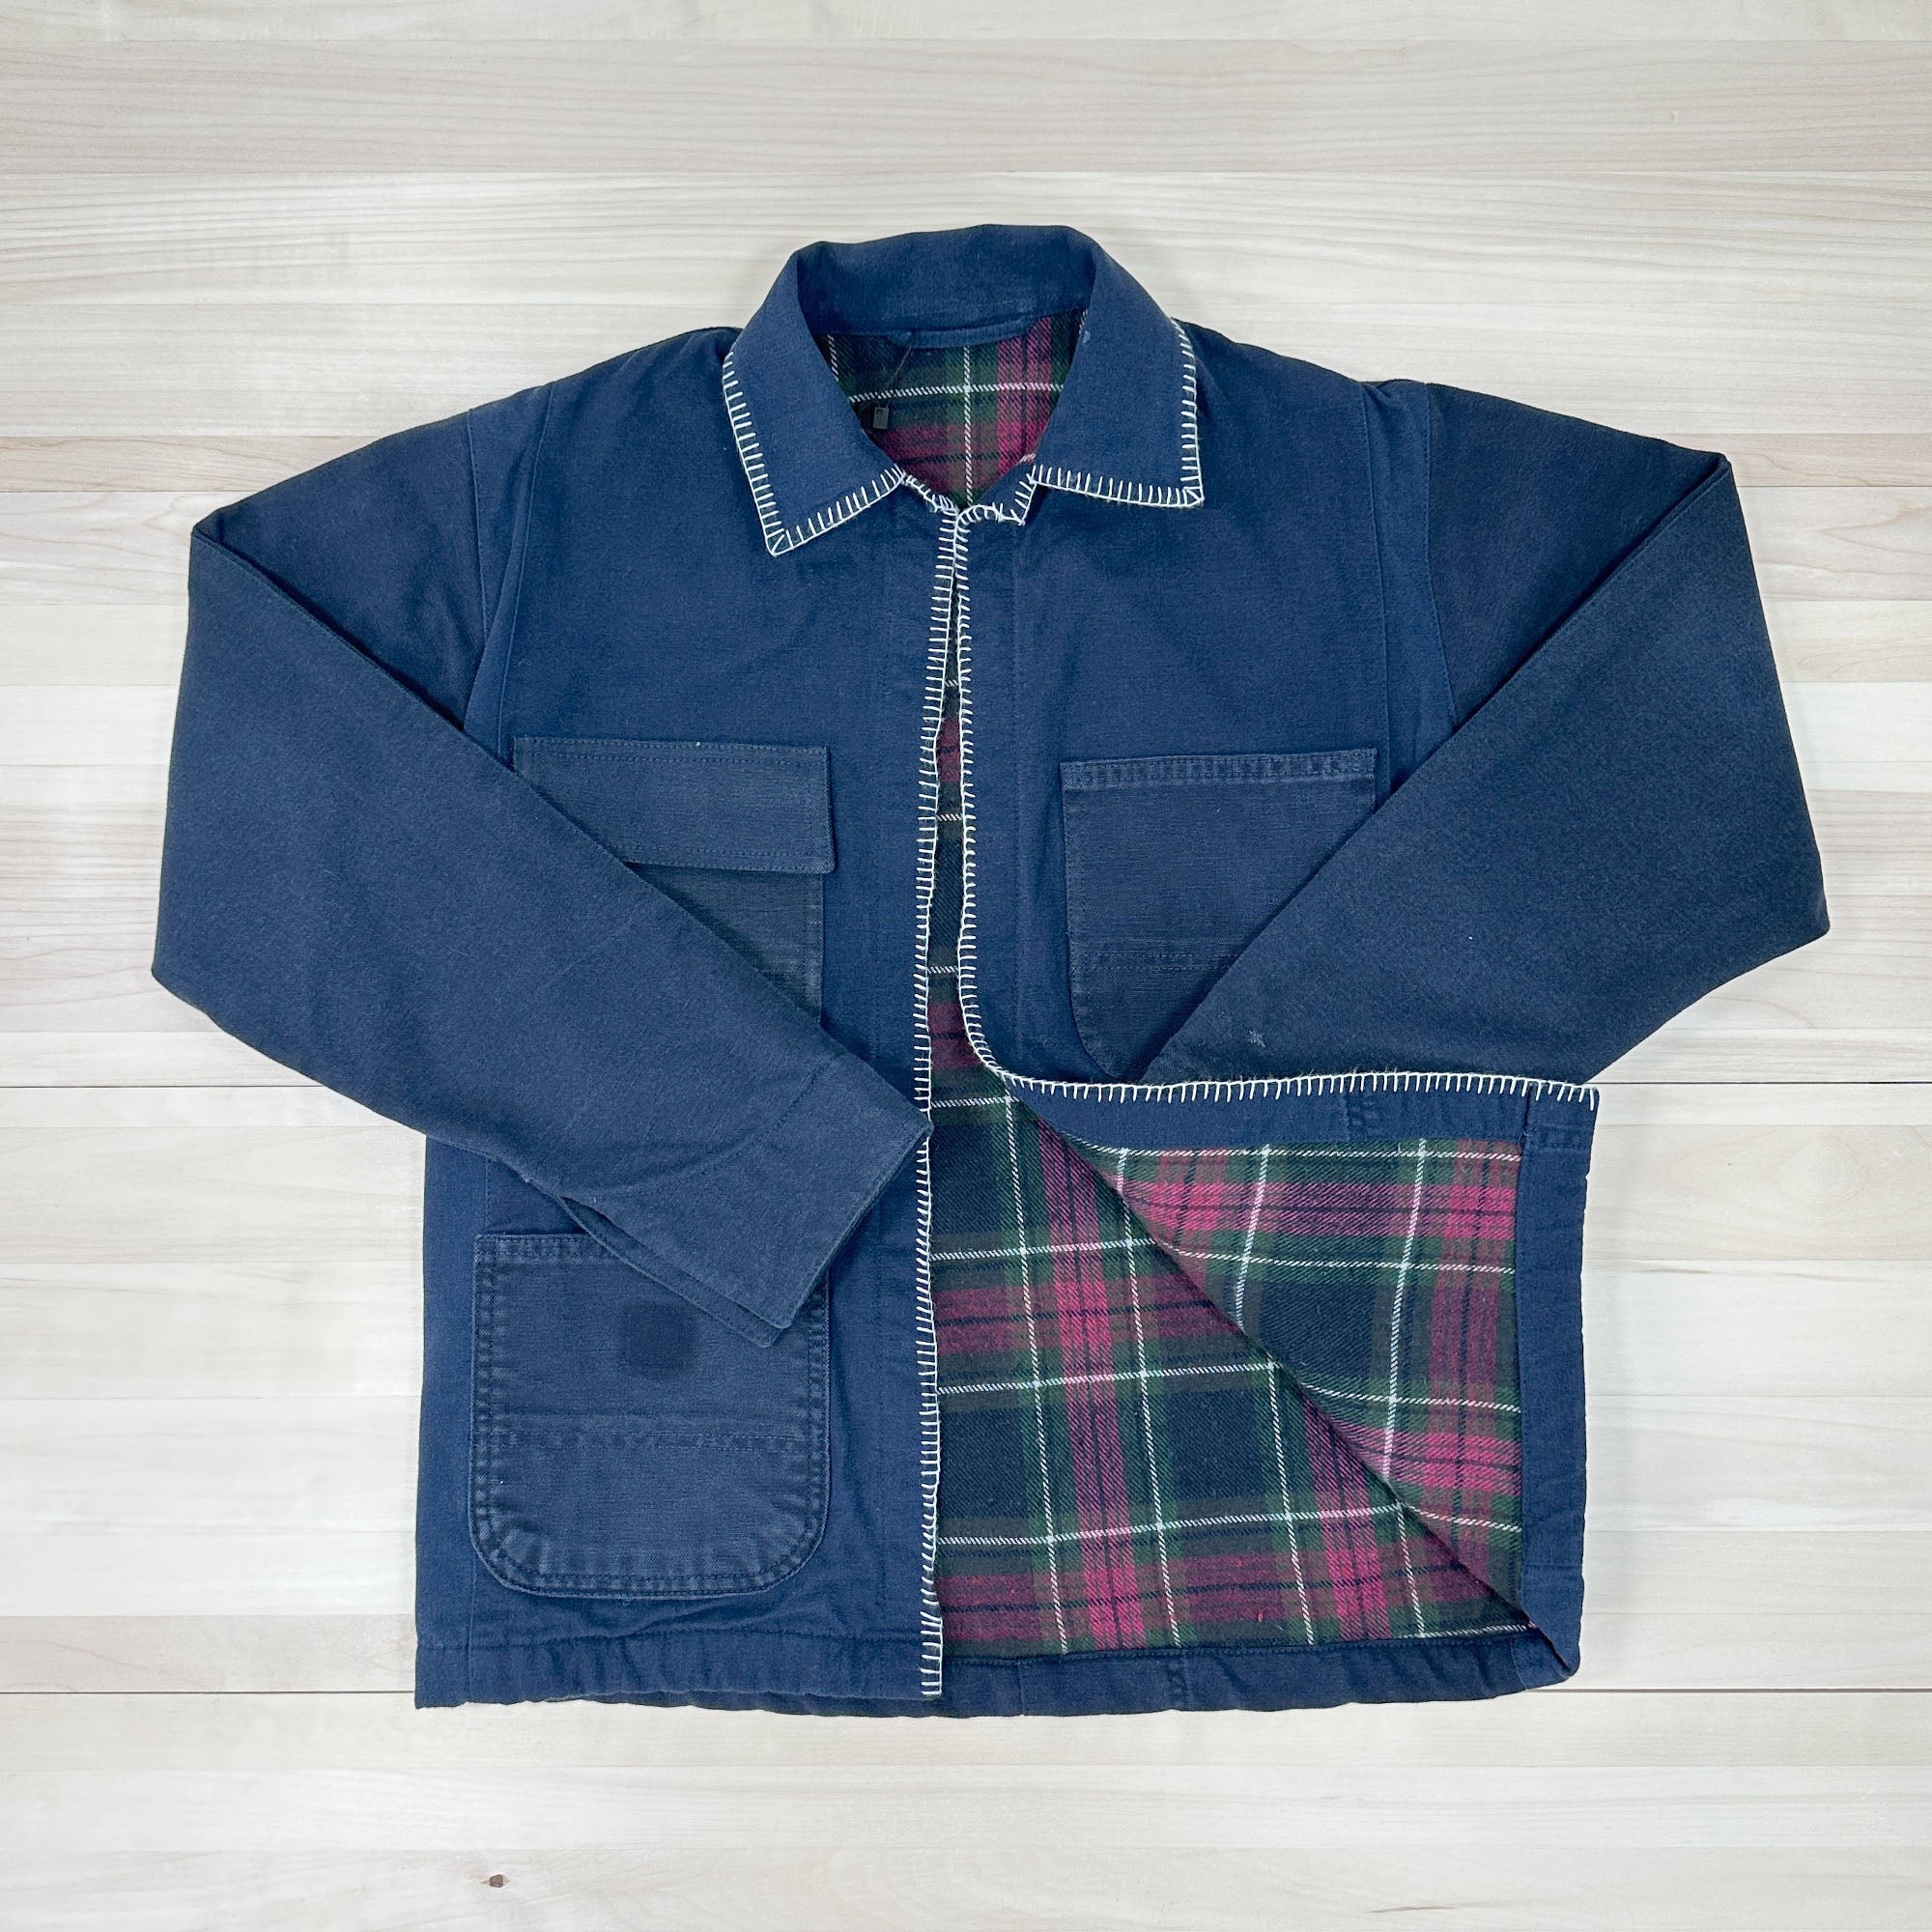 Women's Chore Coat Made From Upcycled Work Jeans - Blanket Stitching - Small Great Lakes Reclaimed Denim